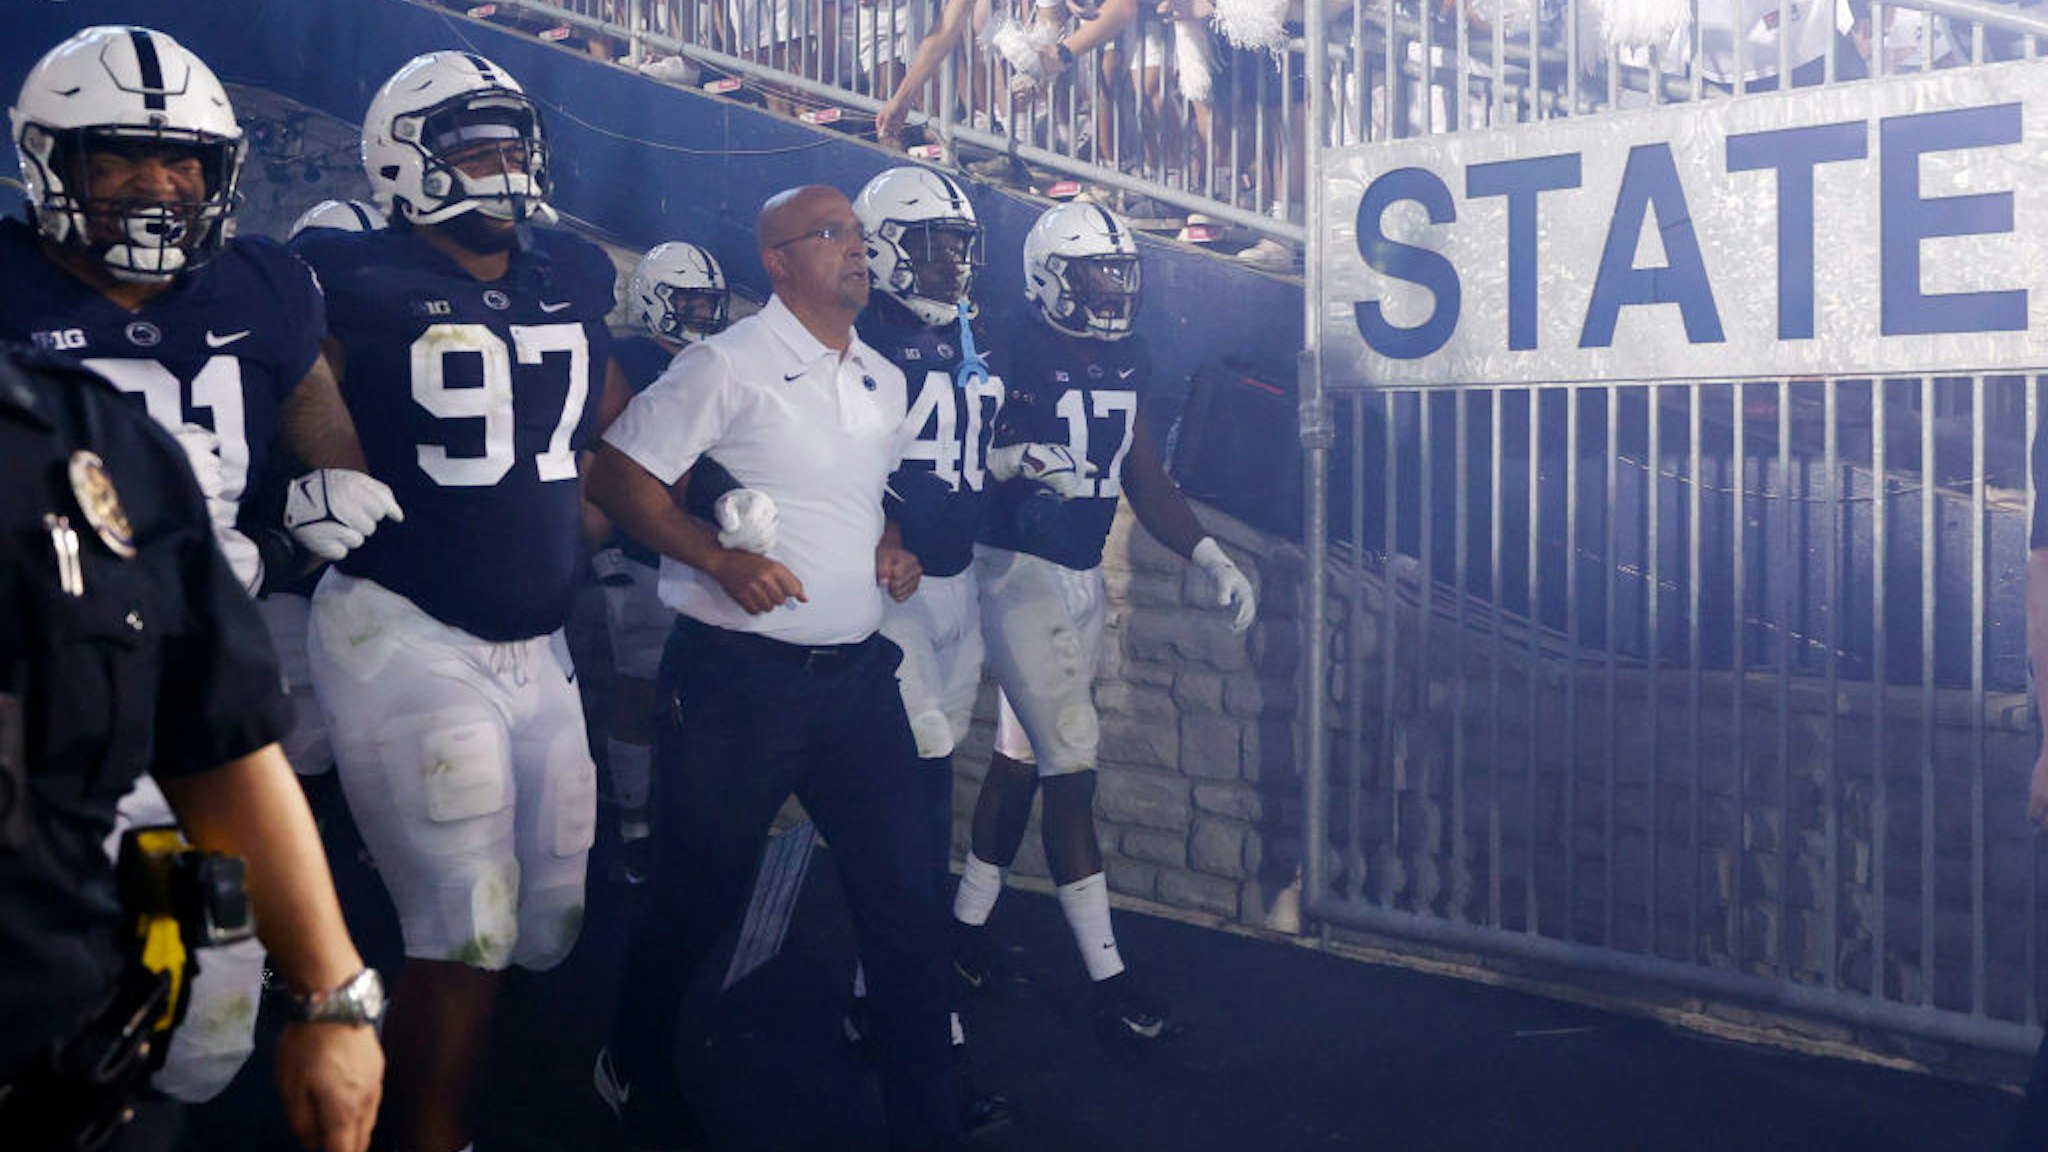 UNIVERSITY PARK, PA - SEPTEMBER 18: Penn State Nittany Lions head coach James Franklin leads his team to the field for a college football game against the Auburn Tigers on Sept. 18, 2021 at Beaver Stadium in University Park, Pennsylvania. (Photo by Joe Robbins/Icon Sportswire via Getty Images)